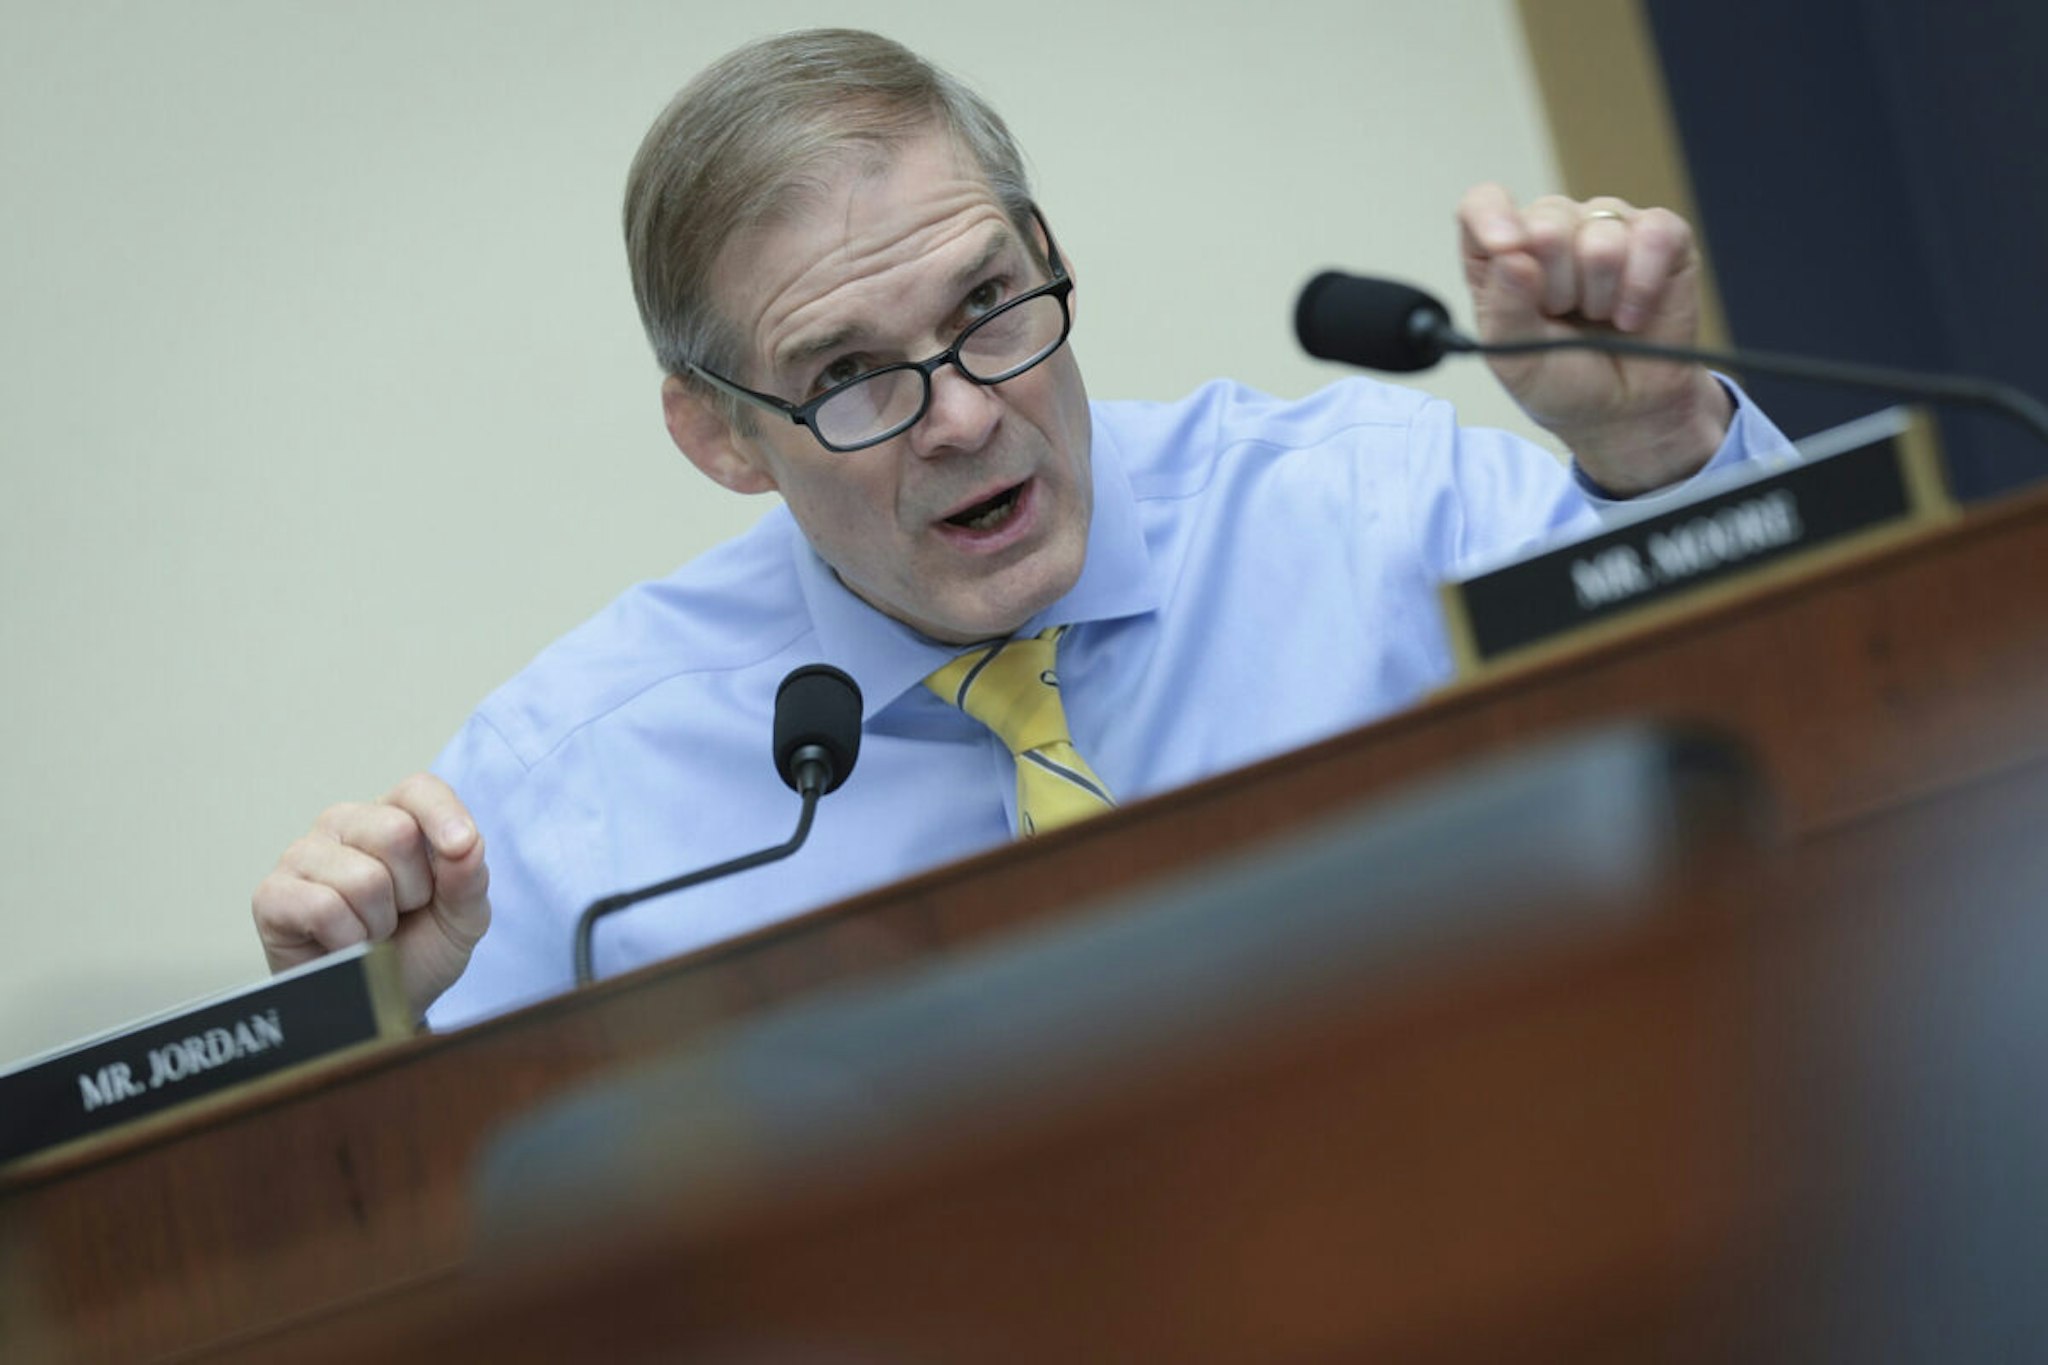 Rep. Jim Jordan (R-OH) asks questions during a hearing held by the House Subcommittee on Immigration Integrity, Security, and Enforcement on Capitol Hill May 23, 2023 in Washington, DC.